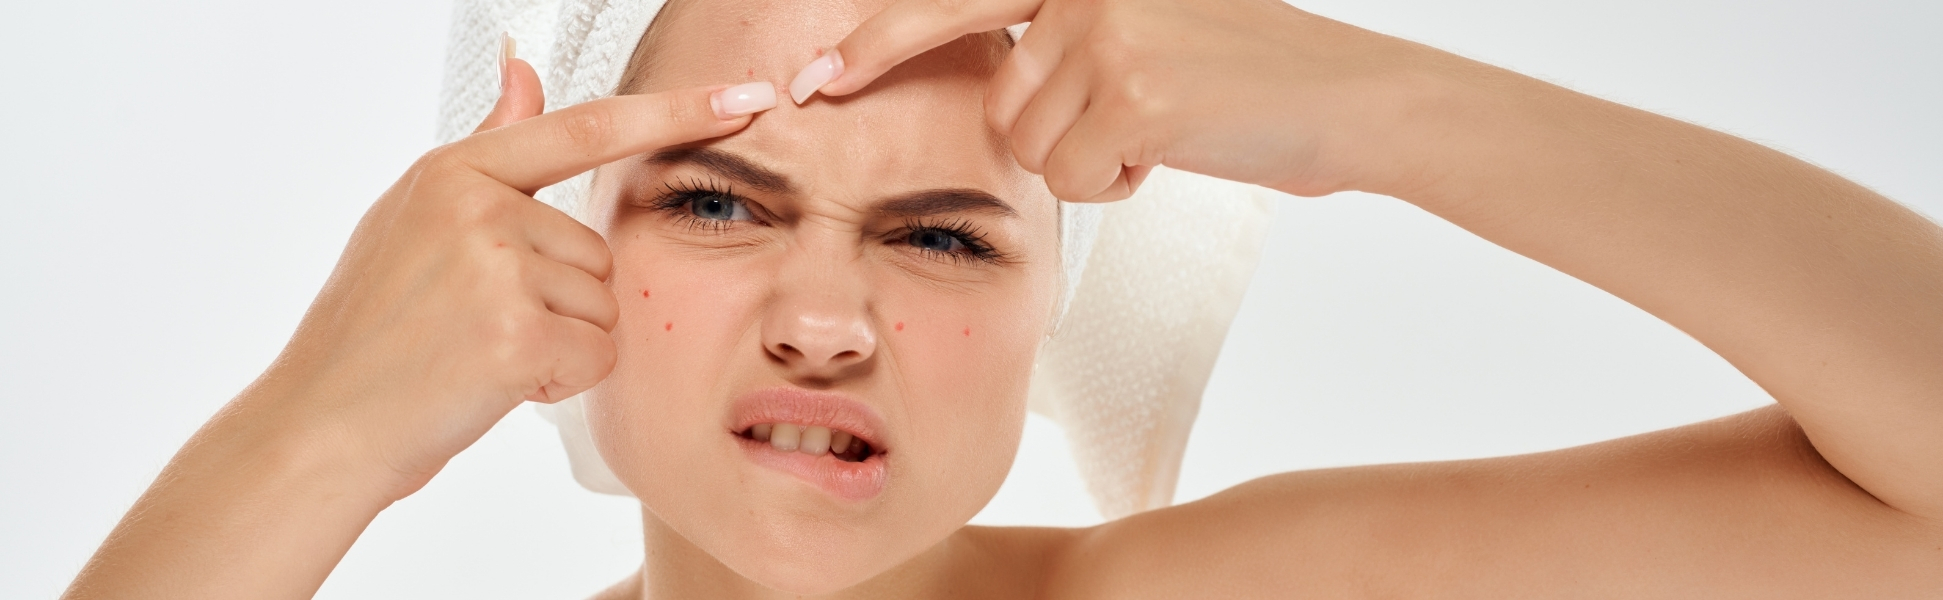 remedies for pimple